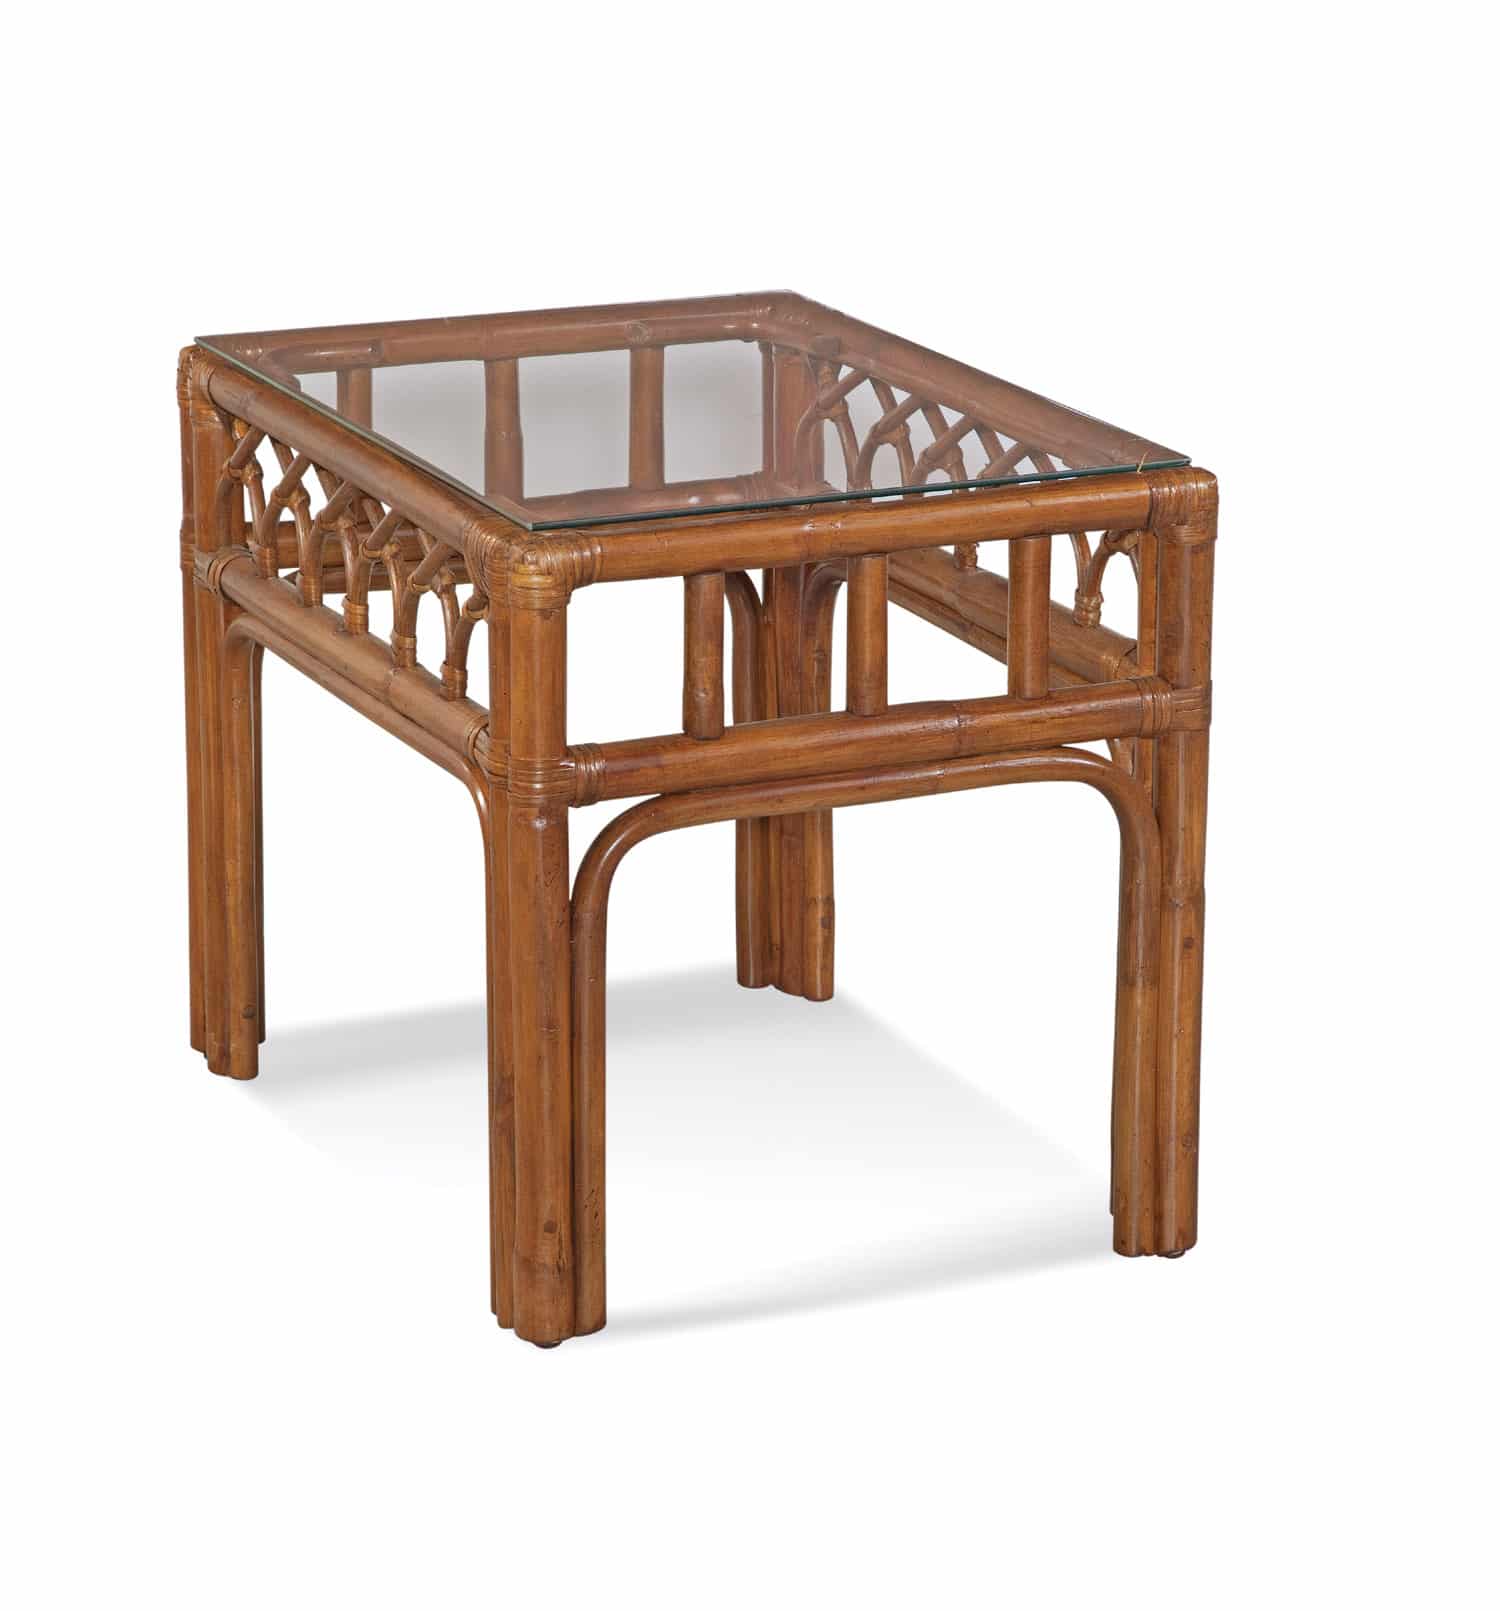 Edgewater Rattan End Table 914-071 Made in the USA by Braxton Culler